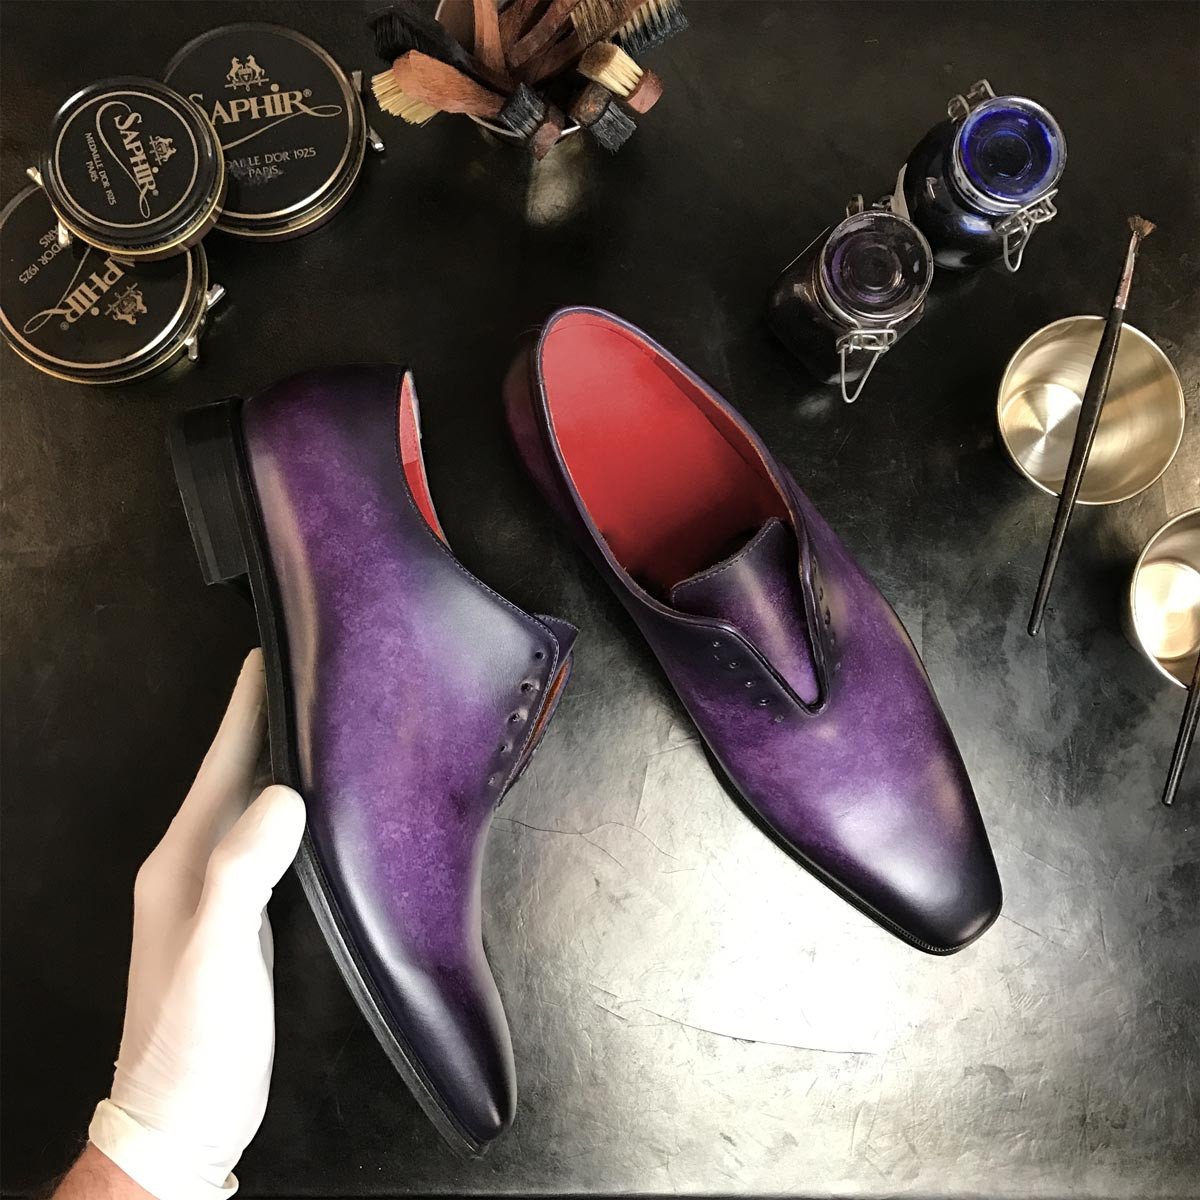 YANG - Unique Handcrafted Whole cut Oxford Dress Shoe w/ purple and black handpainted Patina